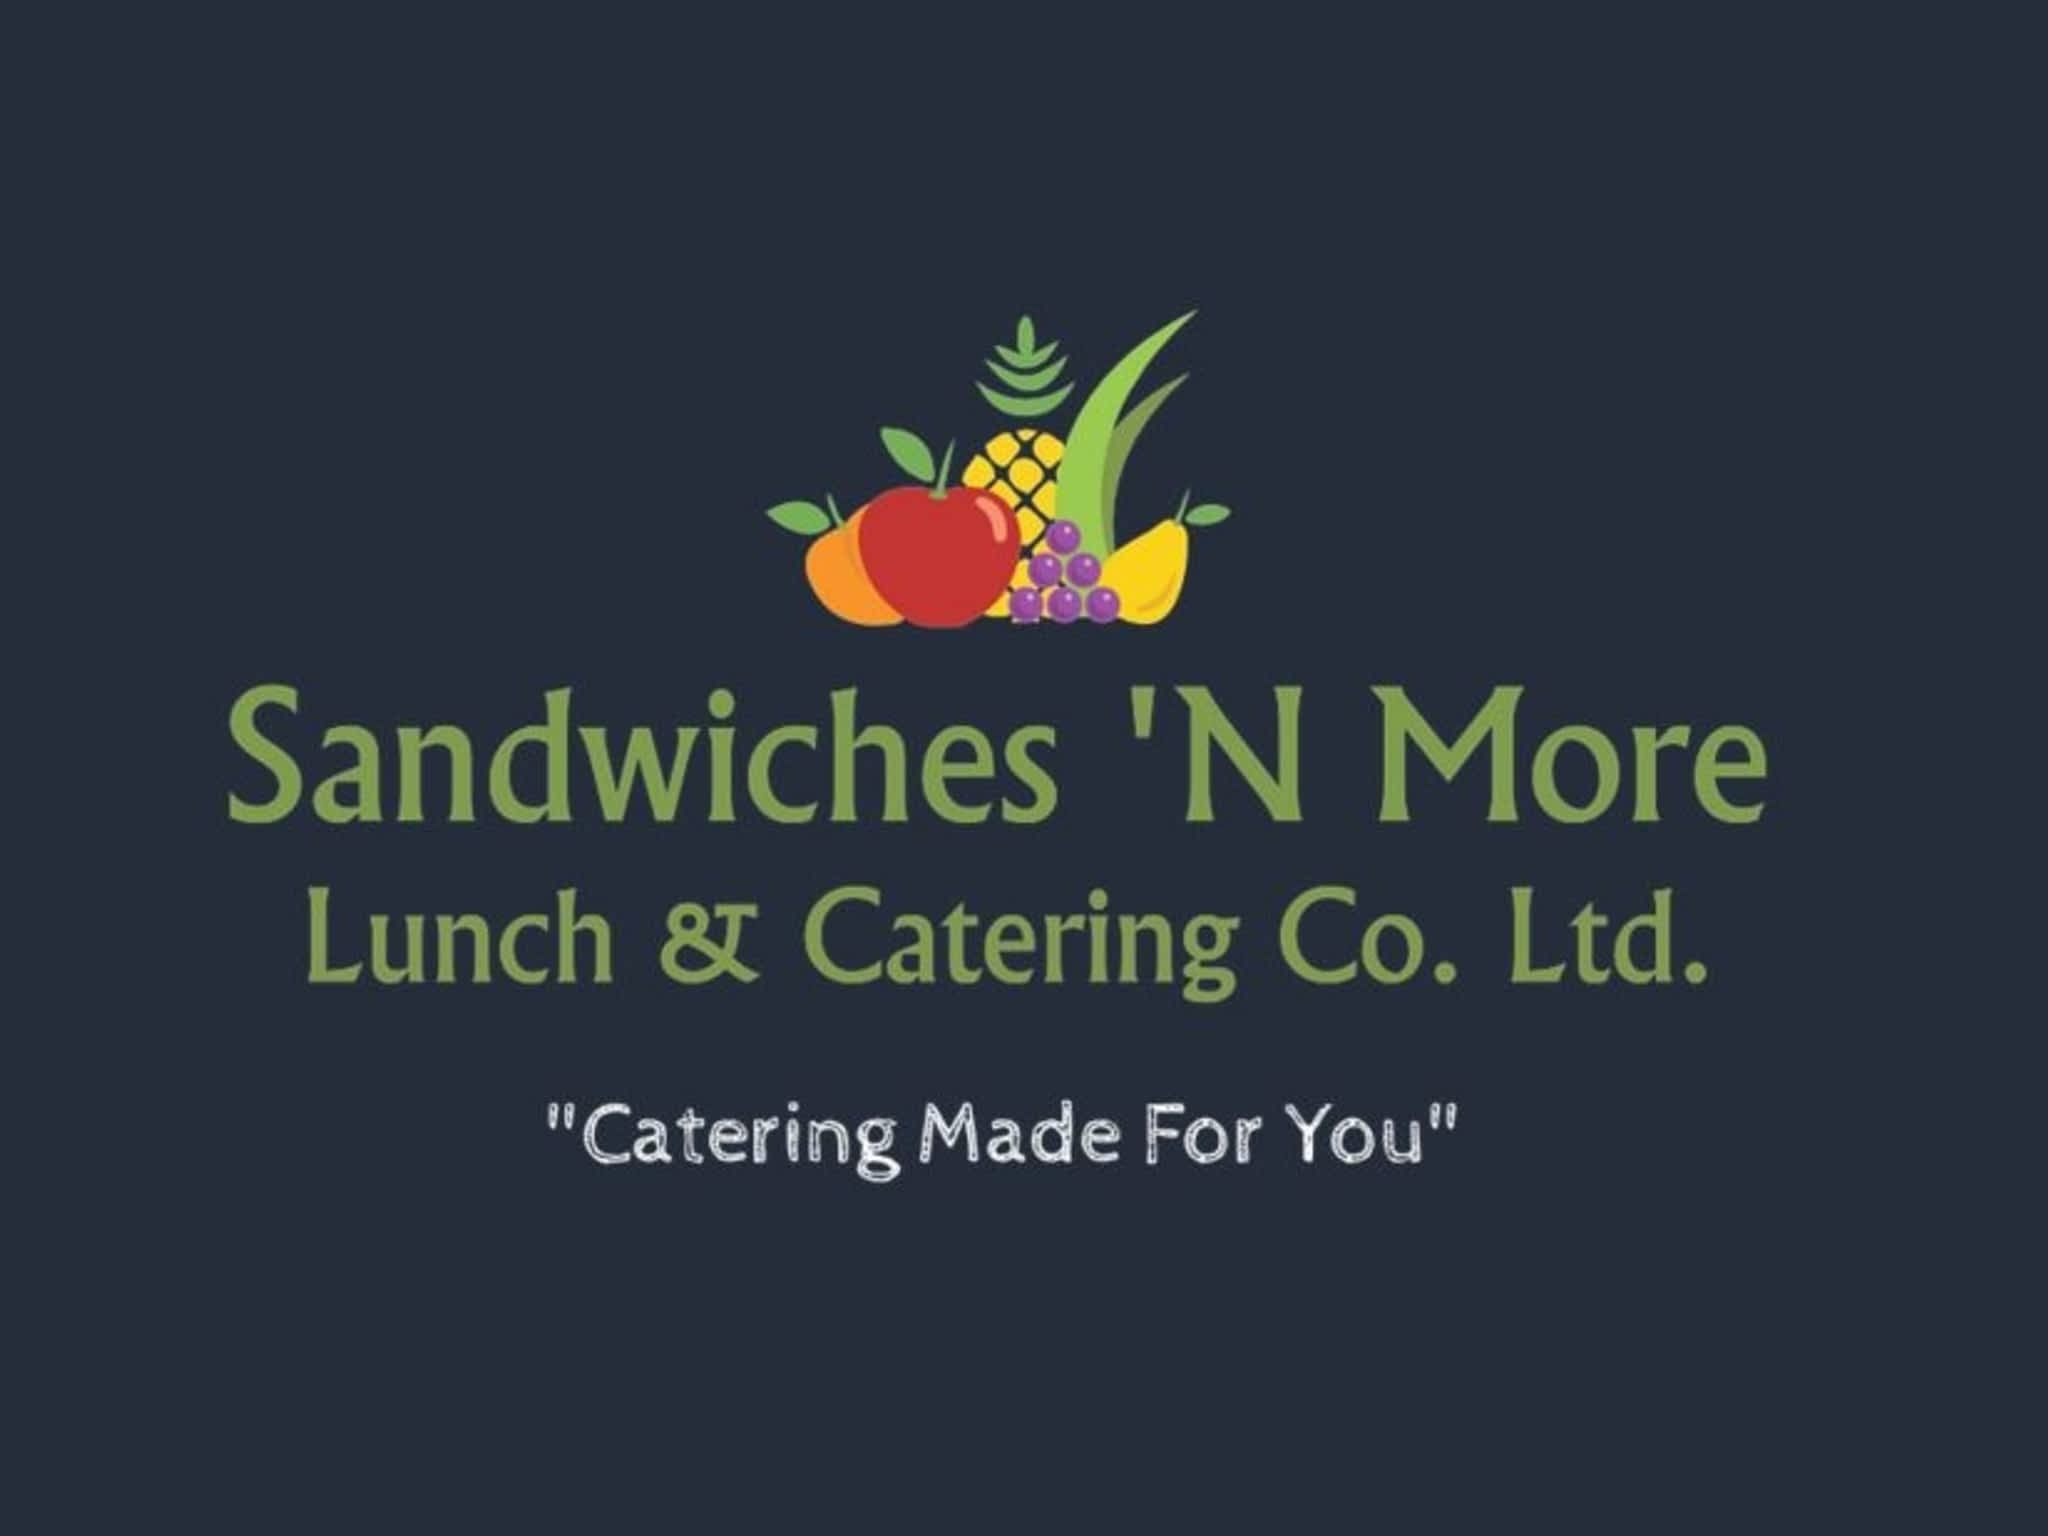 photo Sandwiches'N More Lunch & Catering Co. Ltd.